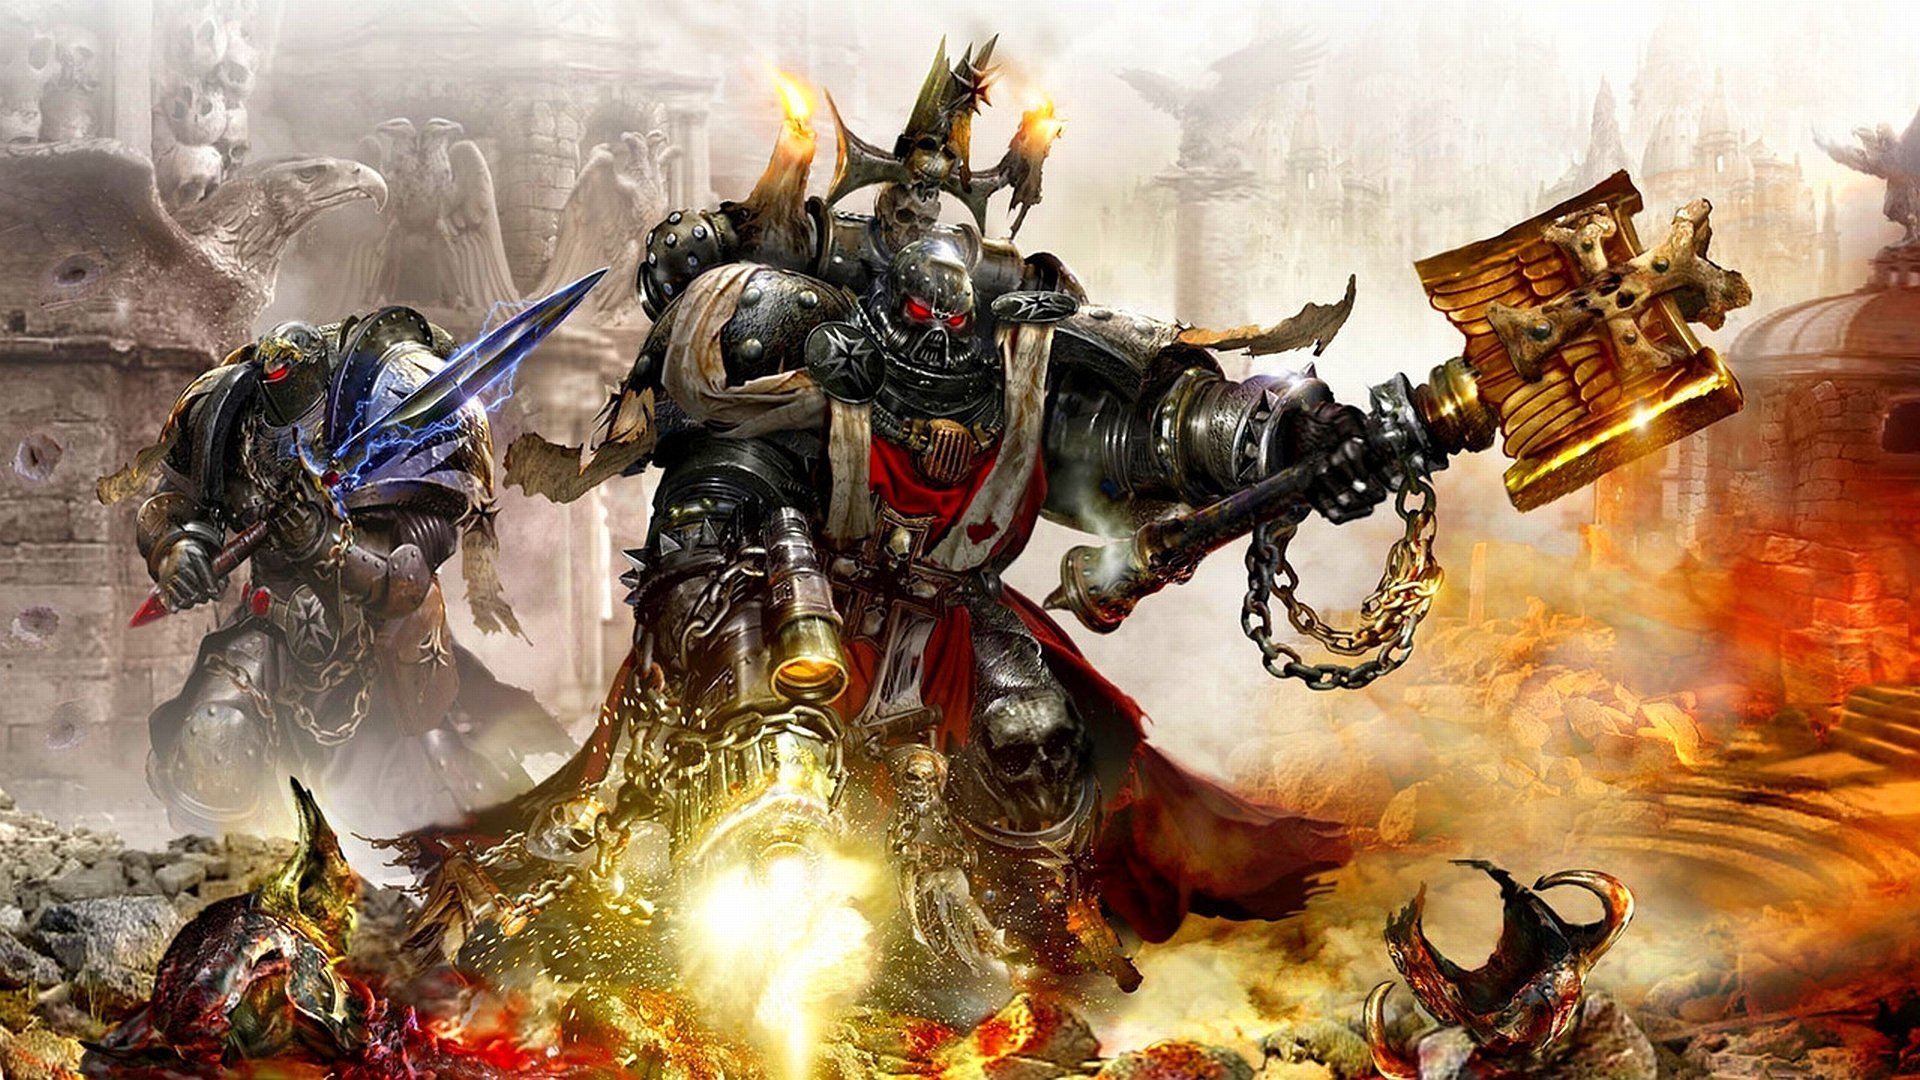 warhammer 40k wallpaper,action adventure game,strategy video game,games,fictional character,demon